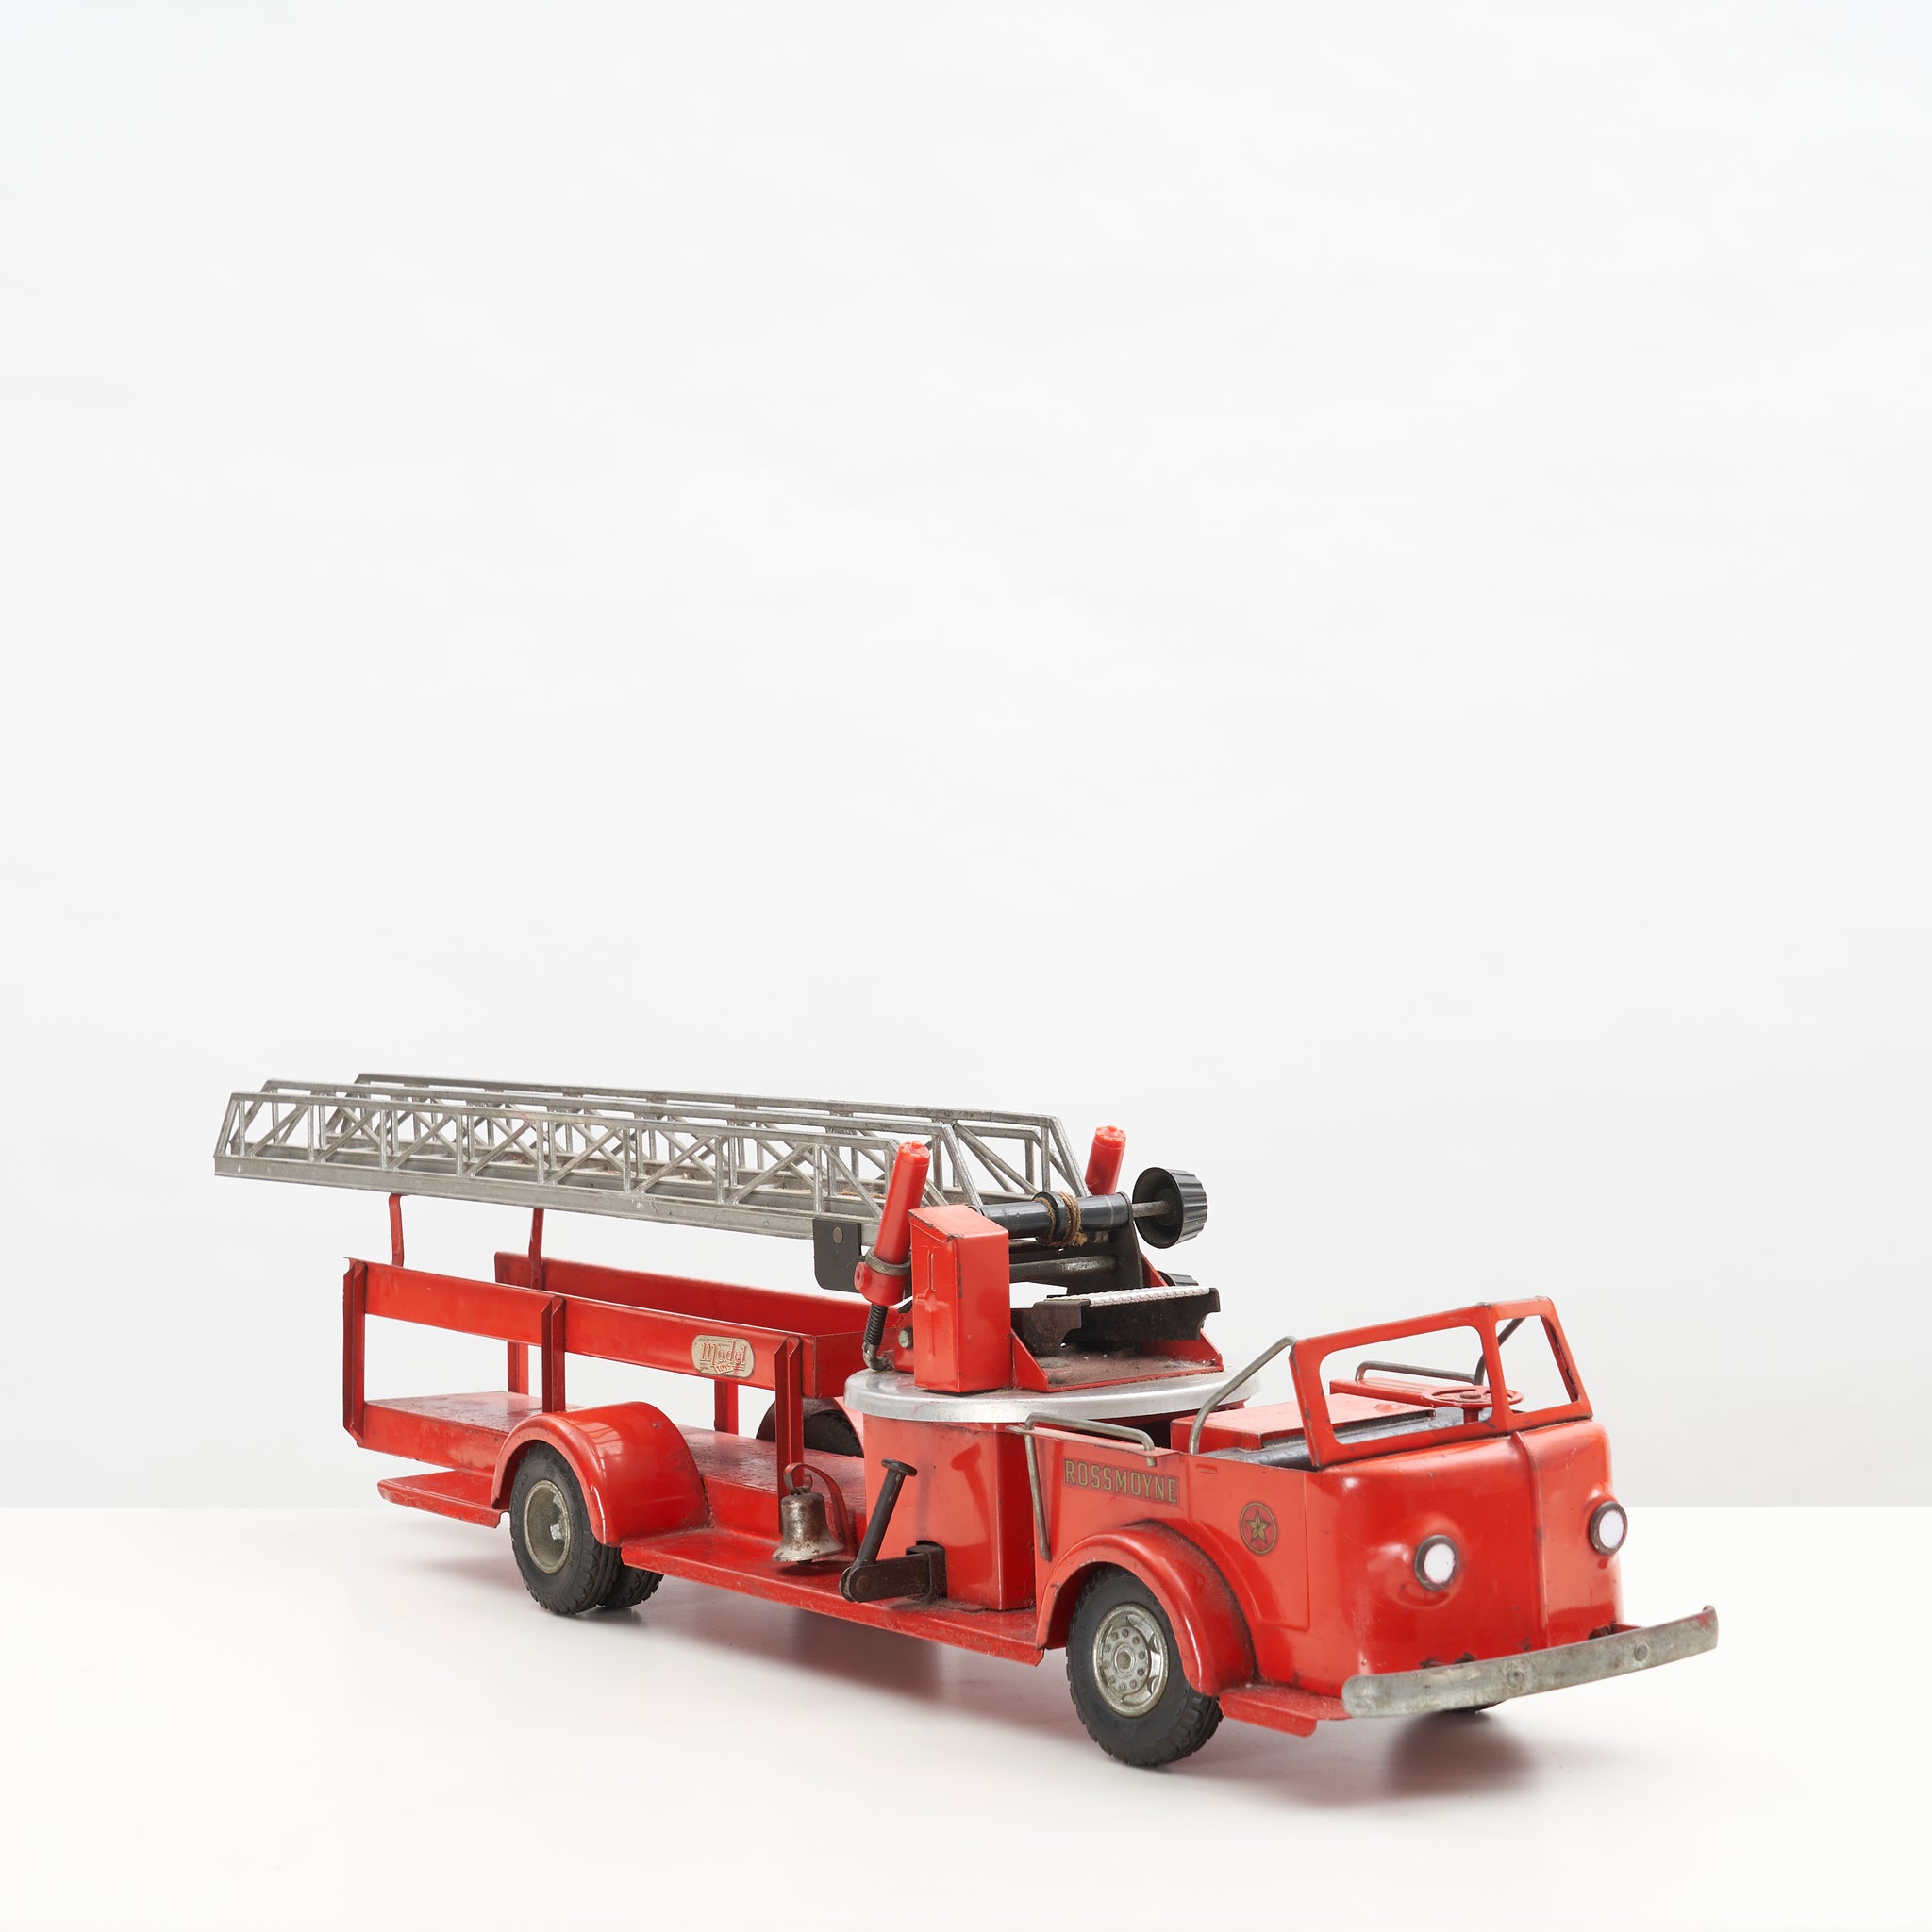 Vintage Fire Truck Toy w/ Extendable Ladder